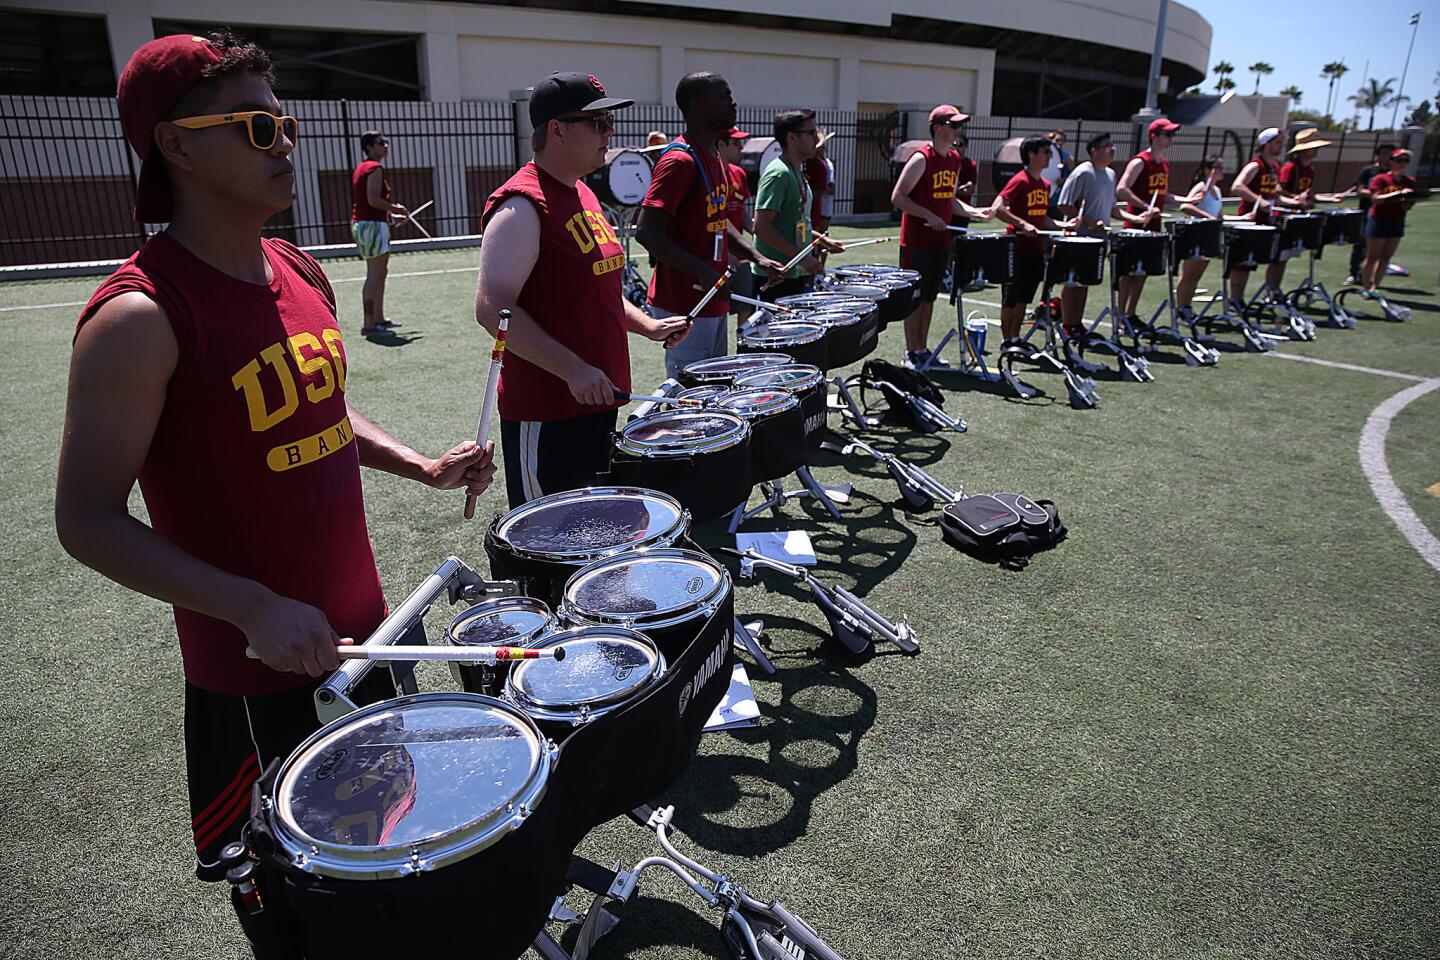 The USC marching band drumline on the first day of practice, Aug. 14, 2015.